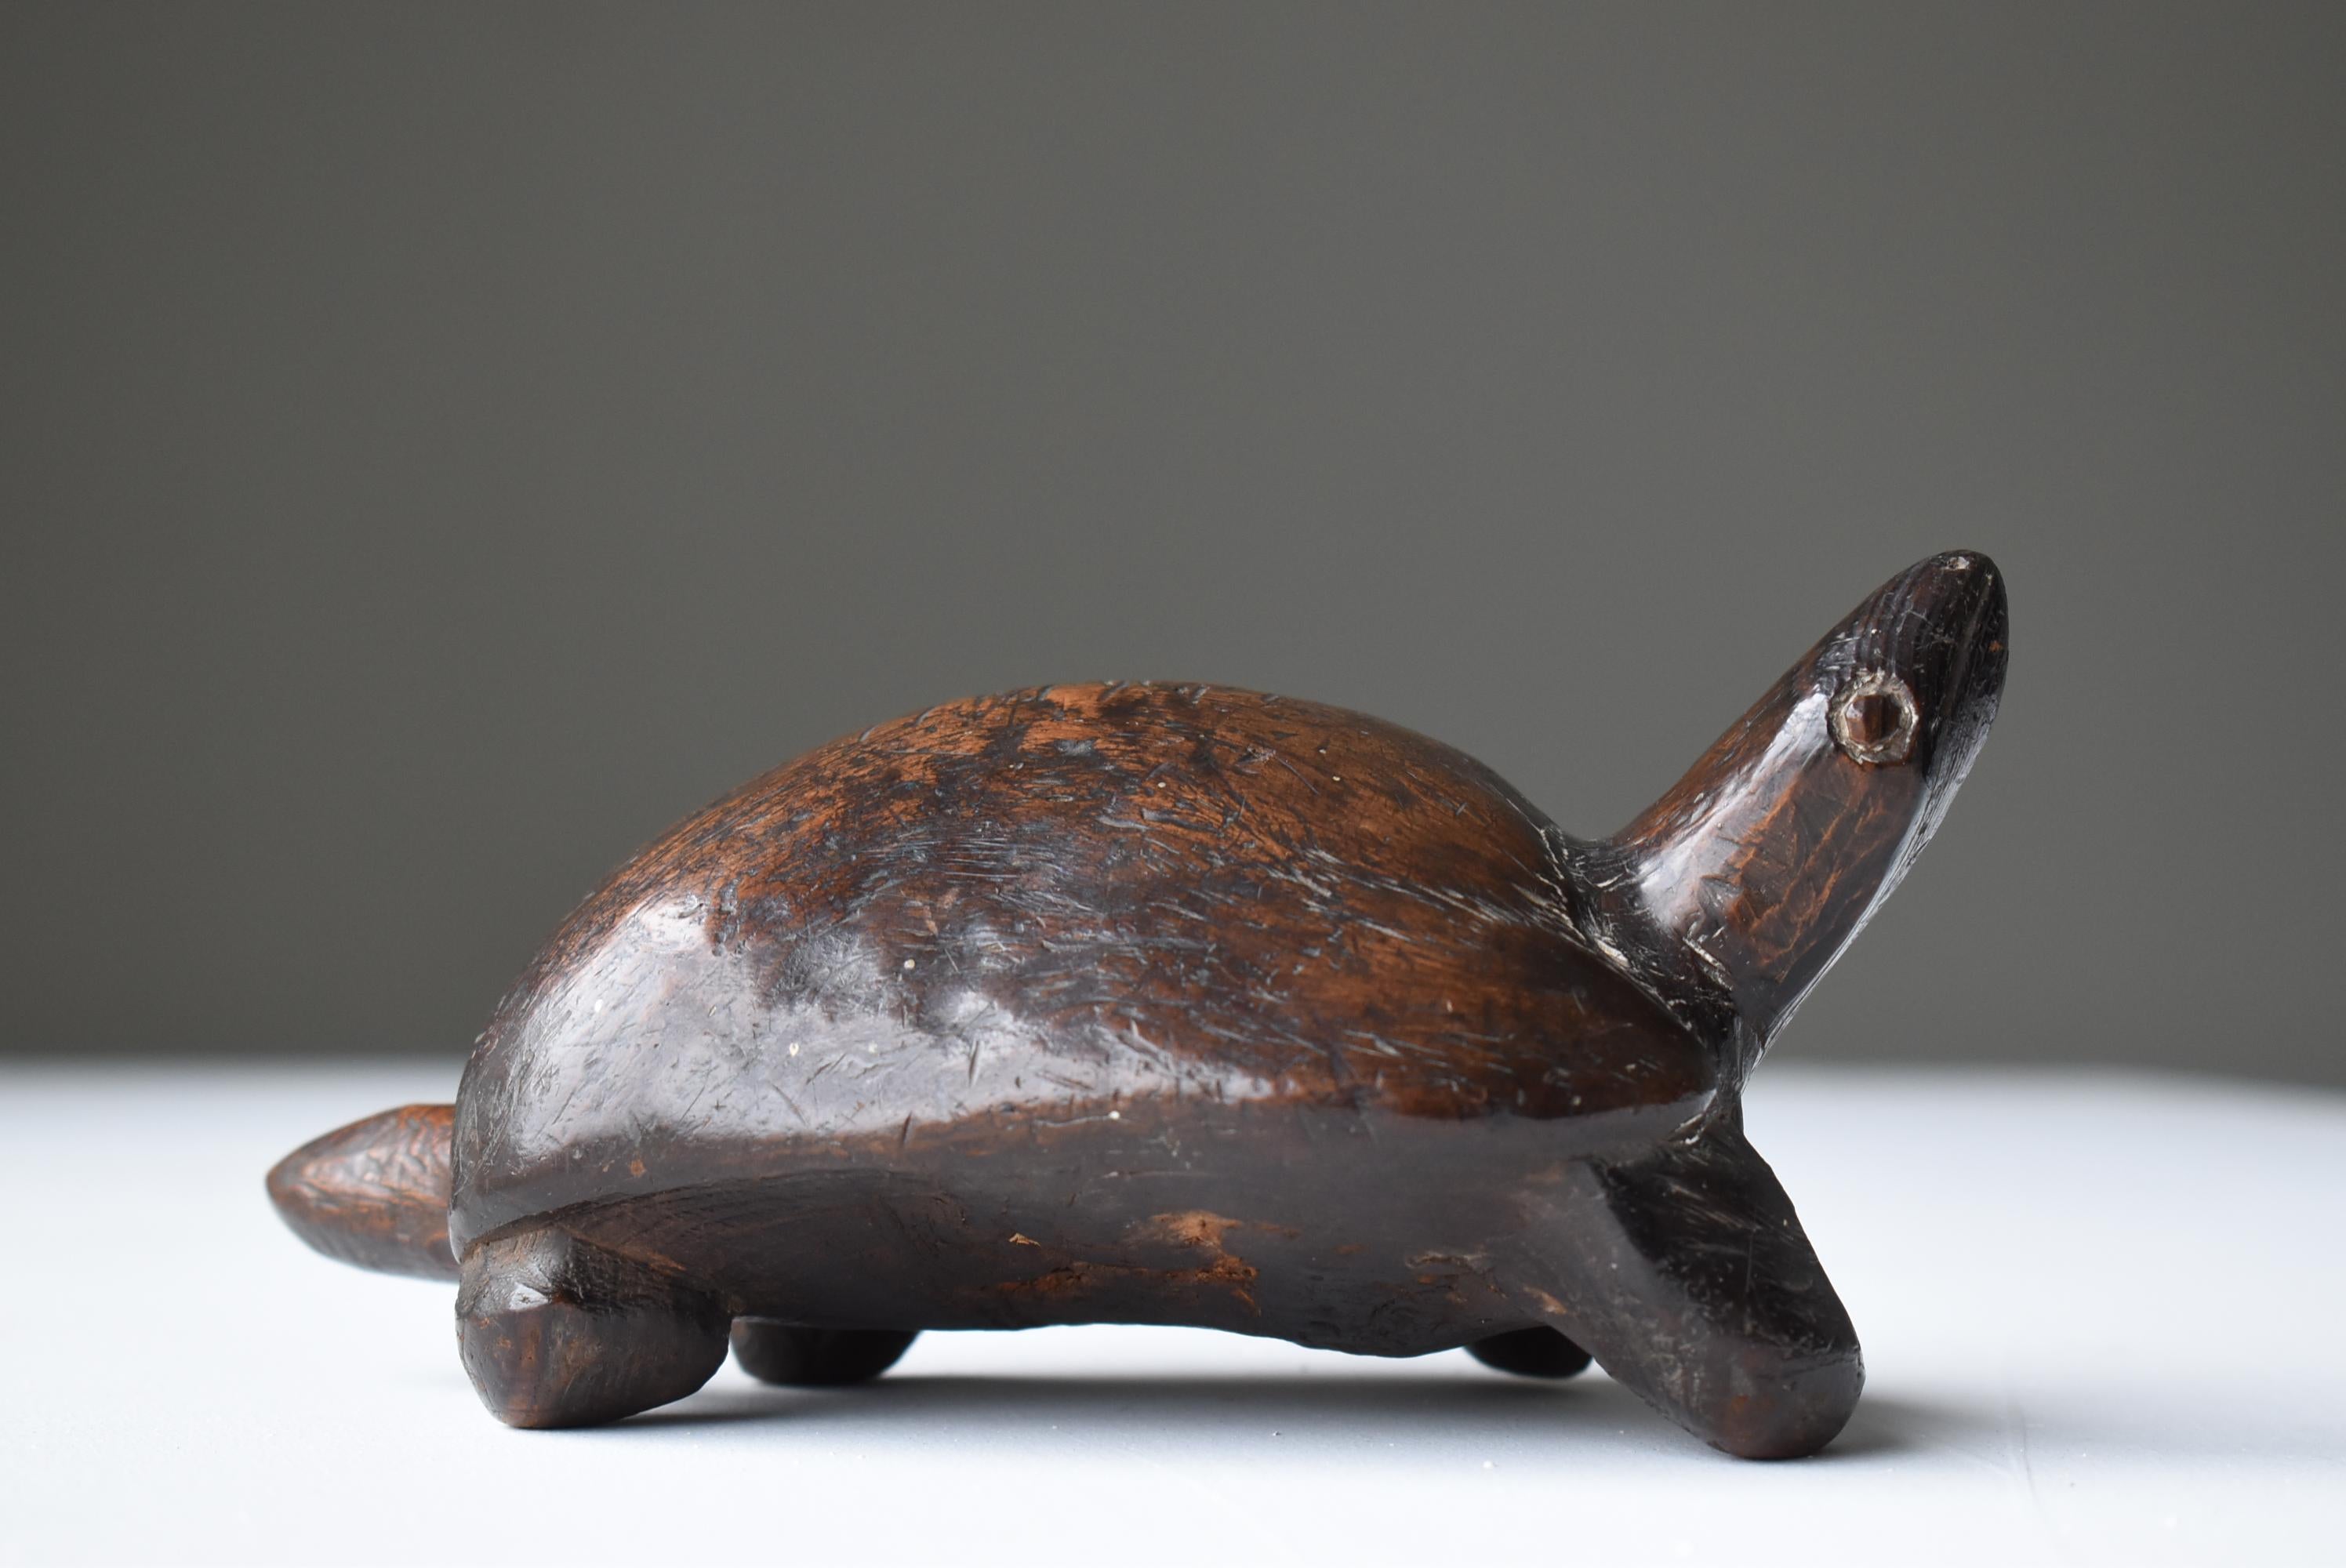 20th Century Japanese Old Wood Carving Turtle 1900s-1920s/Antique Figurine Sculpture Fork Art